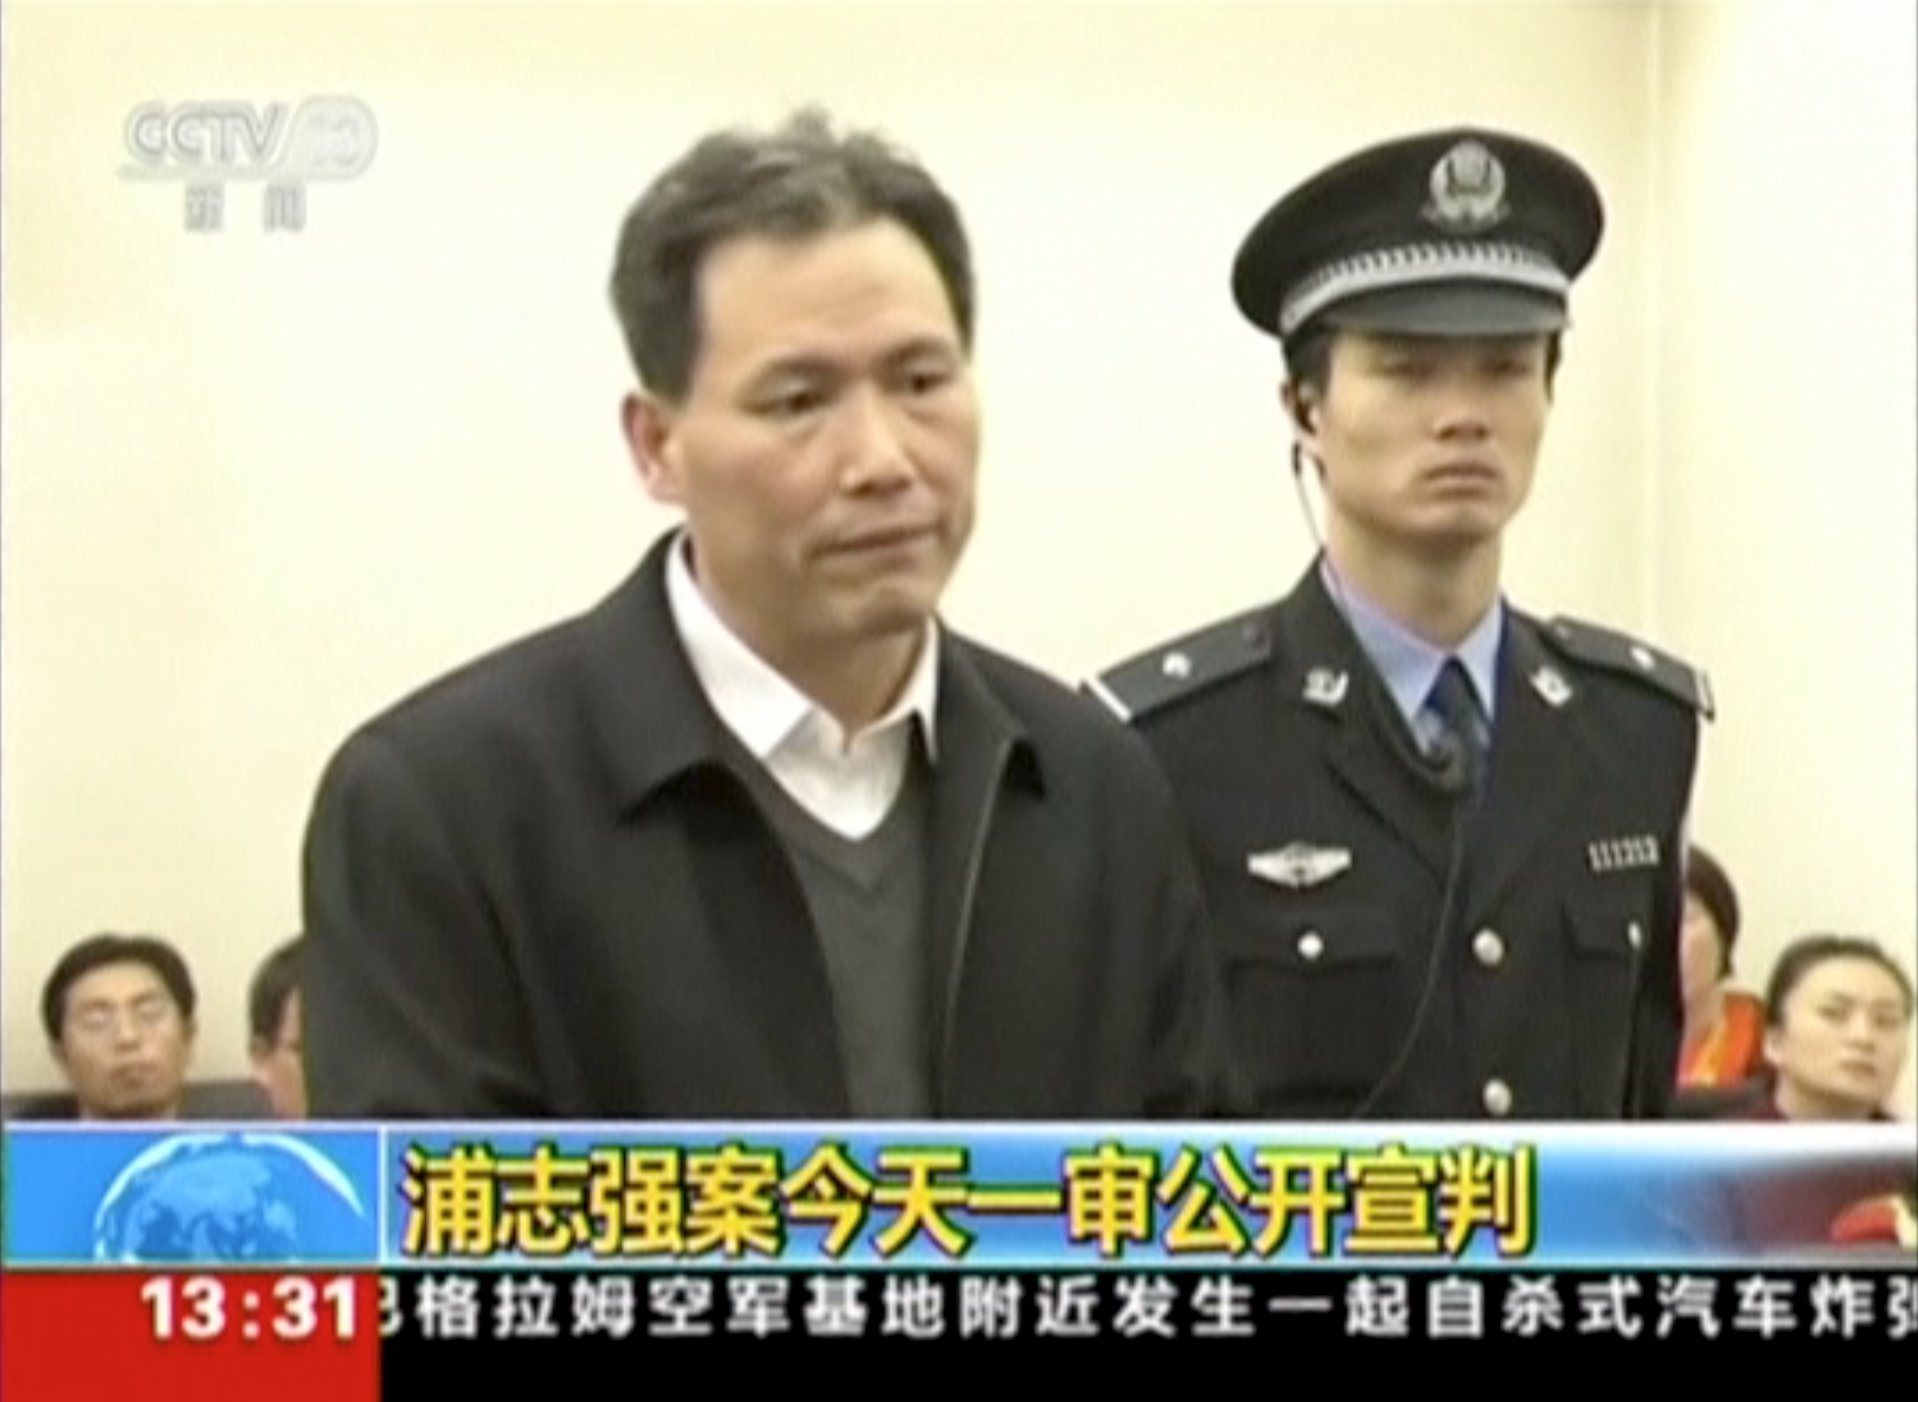 China's rights lawyer Pu Zhiqiang (L) speaks at a court session in Beijing in this still image from a December 14, 2015 video. The court convicted Pu, one of China's most prominent rights lawyers, on December 22, 2015 of "inciting ethnic hatred" and trouble-making with posts criticising the government, handing down a suspended sentence that means he avoids jail but will not practise law again. REUTERS/CCTV via Reuters TV ATTENTION EDITORS - THIS IMAGE WAS PROVIDED BY A THIRD PARTY. THIS PICTURE IS DISTRIBUTED EXACTLY AS RECEIVED BY REUTERS, AS A SERVICE TO CLIENTS. CHINA OUT. NO COMMERCIAL OR EDITORIAL SALES IN CHINA. TPX IMAGES OF THE DAY